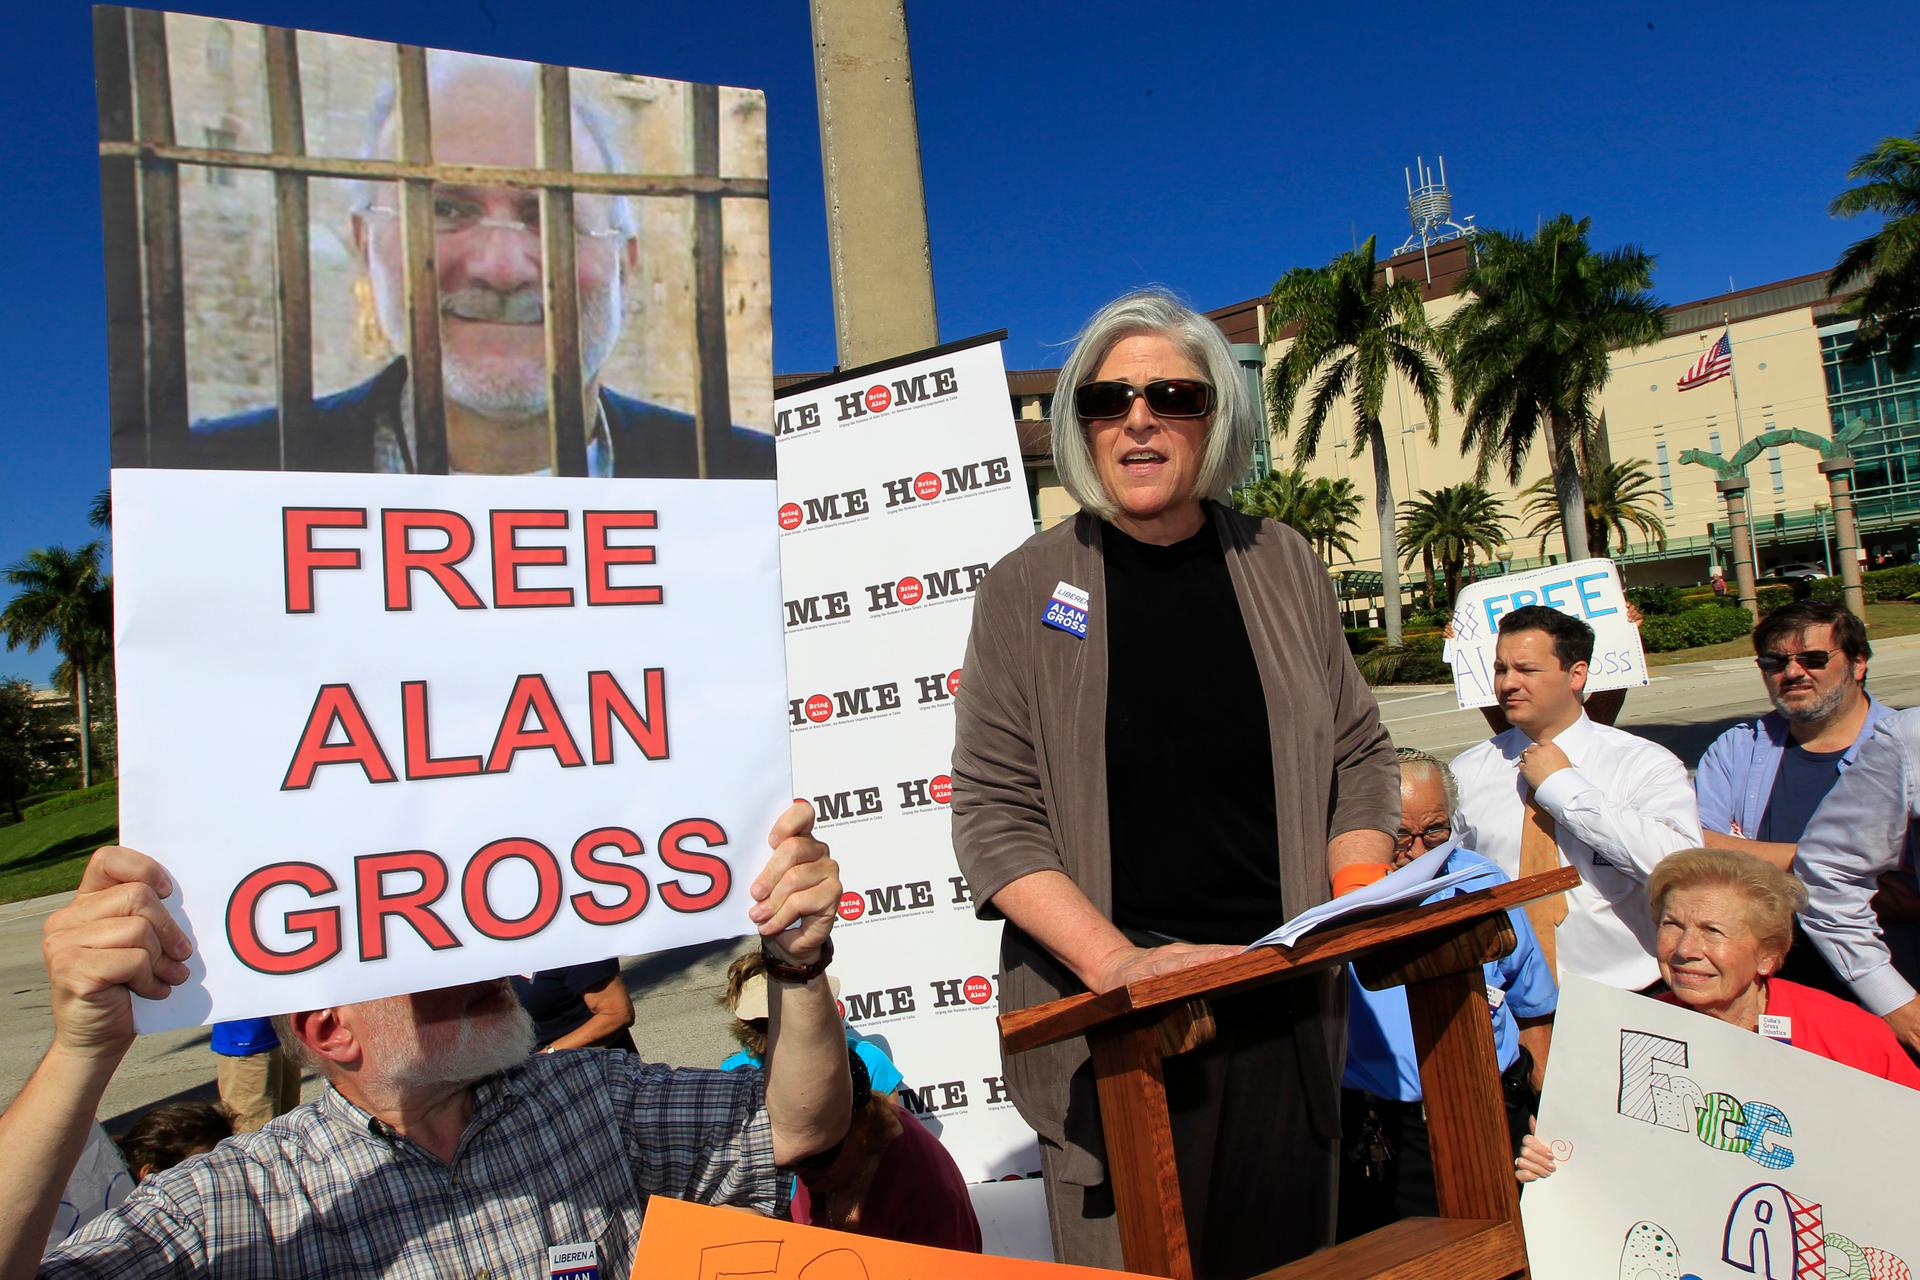 Judy Gross the wife of a U.S. contractor jailed in Cuba for crimes against the state, speaks at a rally for her husband's release in Florida.